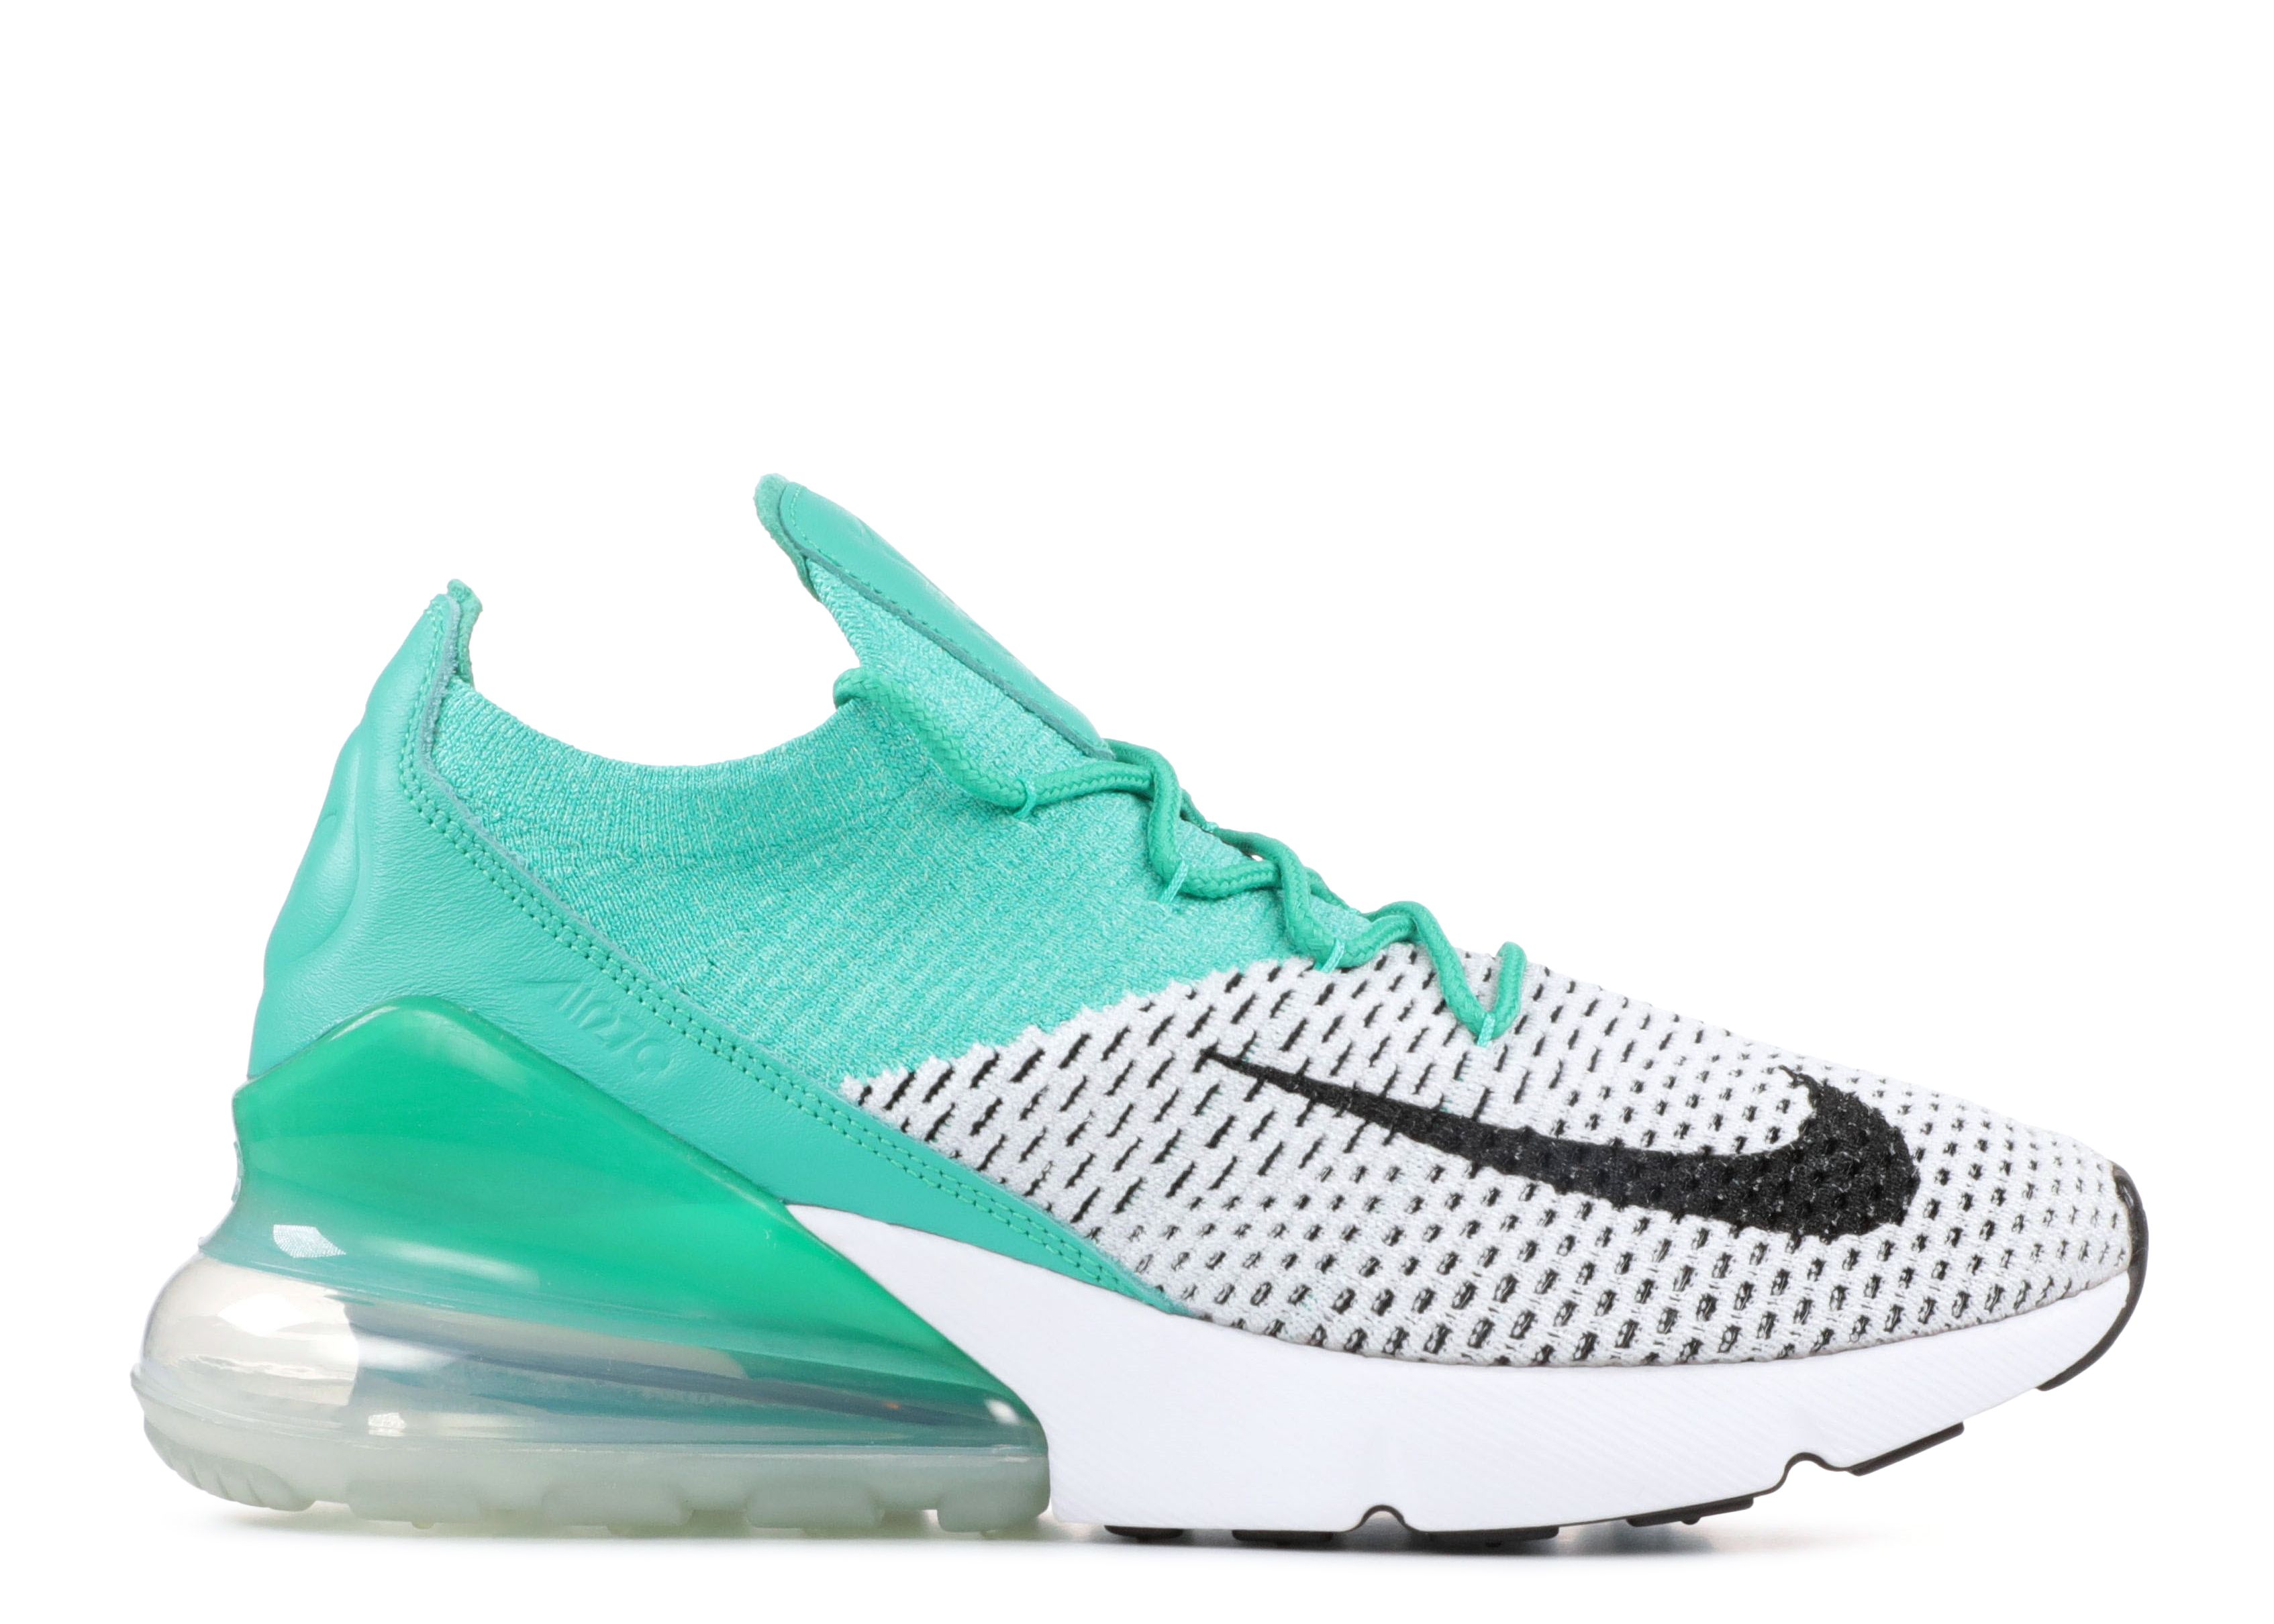 Кроссовки Nike Wmns Air Max 270 Flyknit 'Clear Emerald', зеленый nike air max 270 men s sneakers size 40 45 cn7078 071